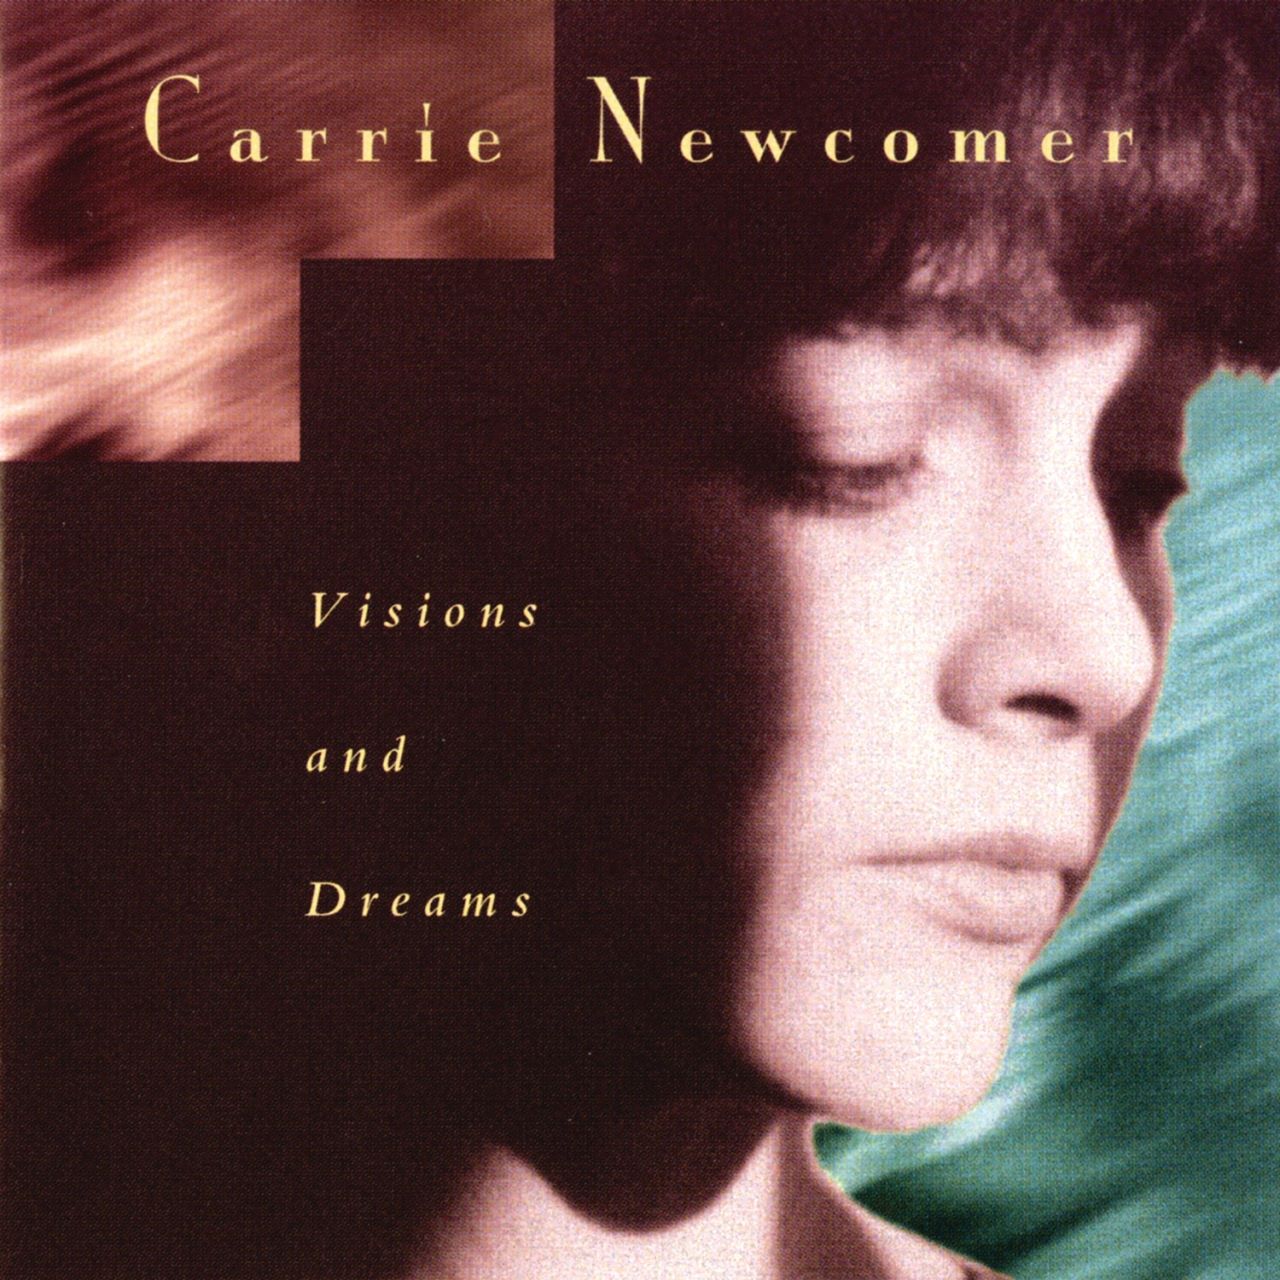 Carrie Newcomer - Visions And Dreams cover album